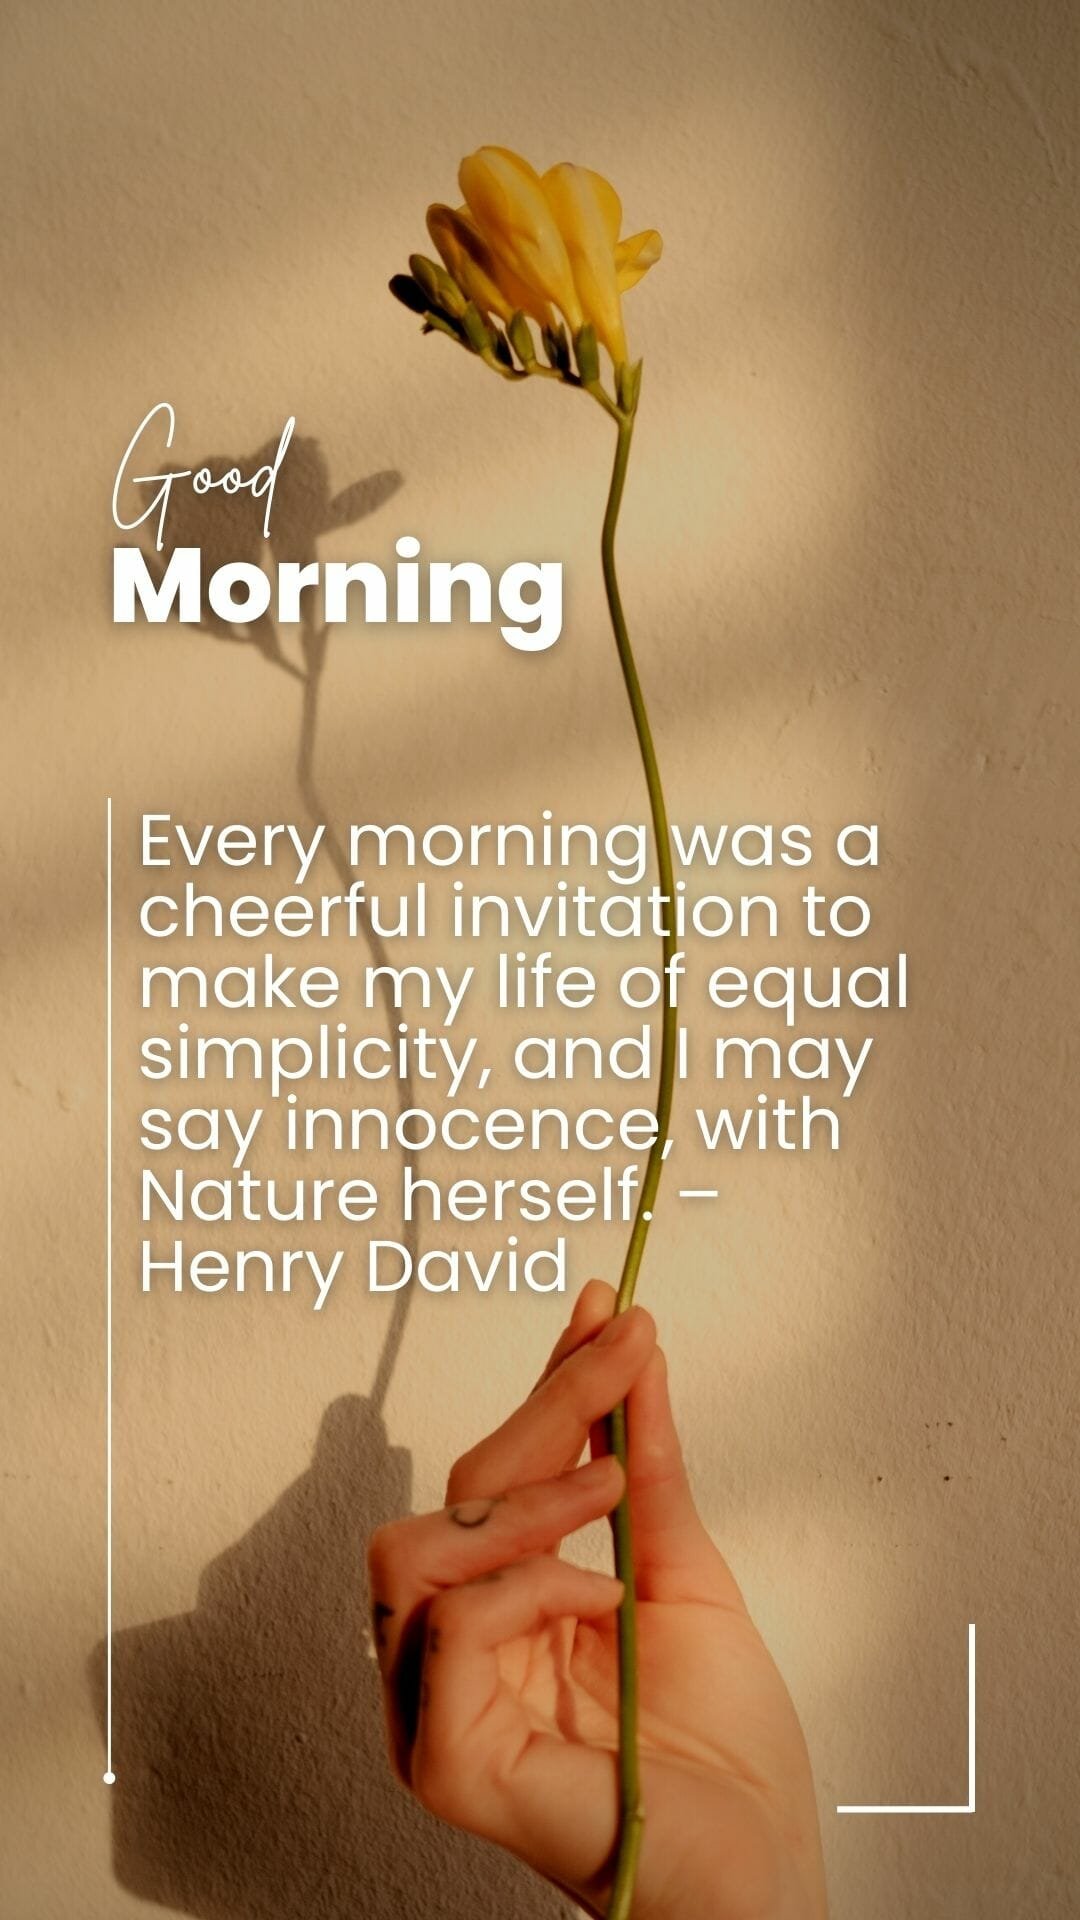 Good Morning messages for Instagram Story